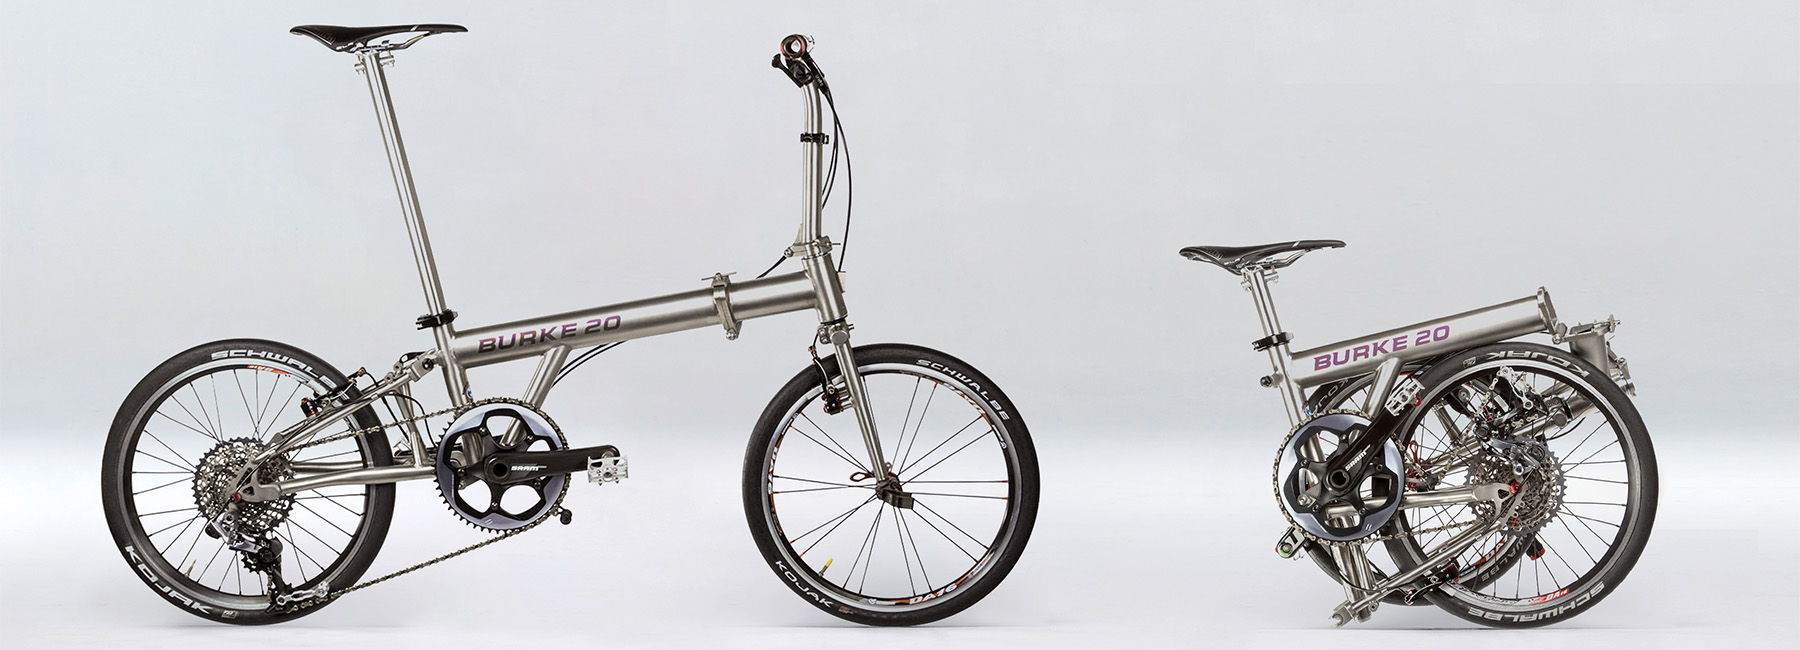 burke 20 is a titanium folding bike that fits into your suitcase within seconds